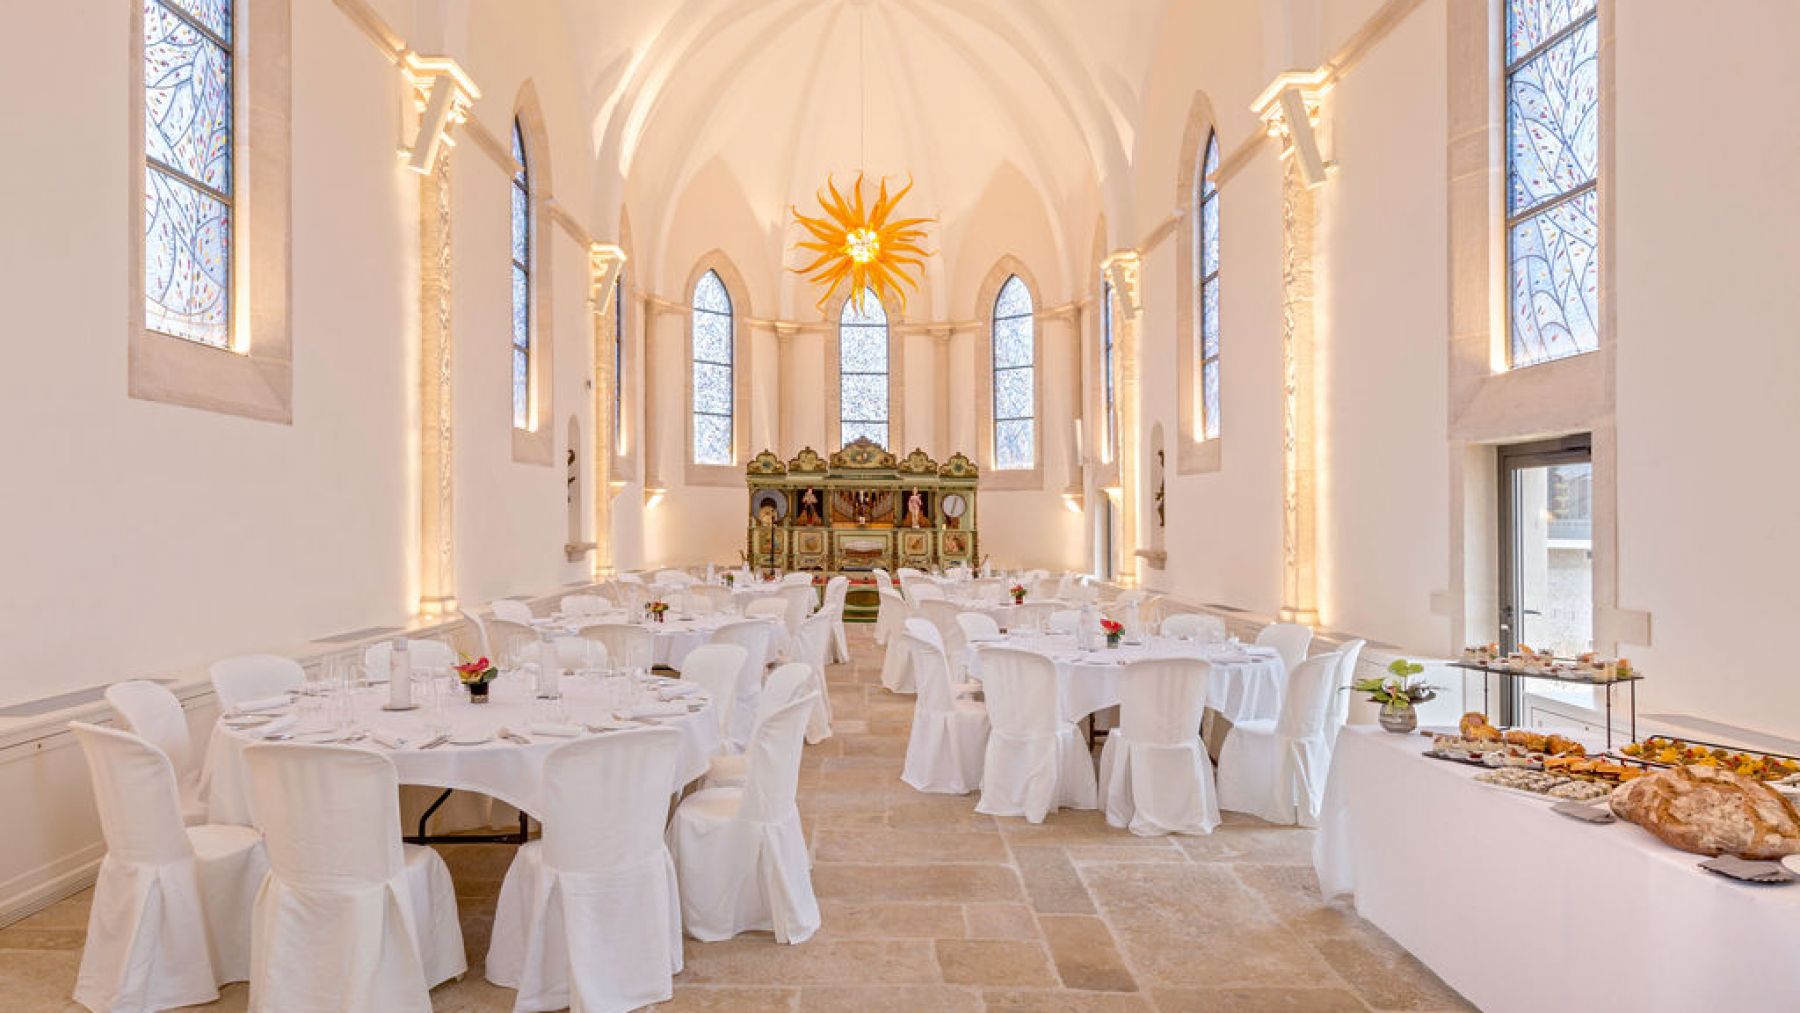 Plan a private event at the Hotel les Sept Fontaines